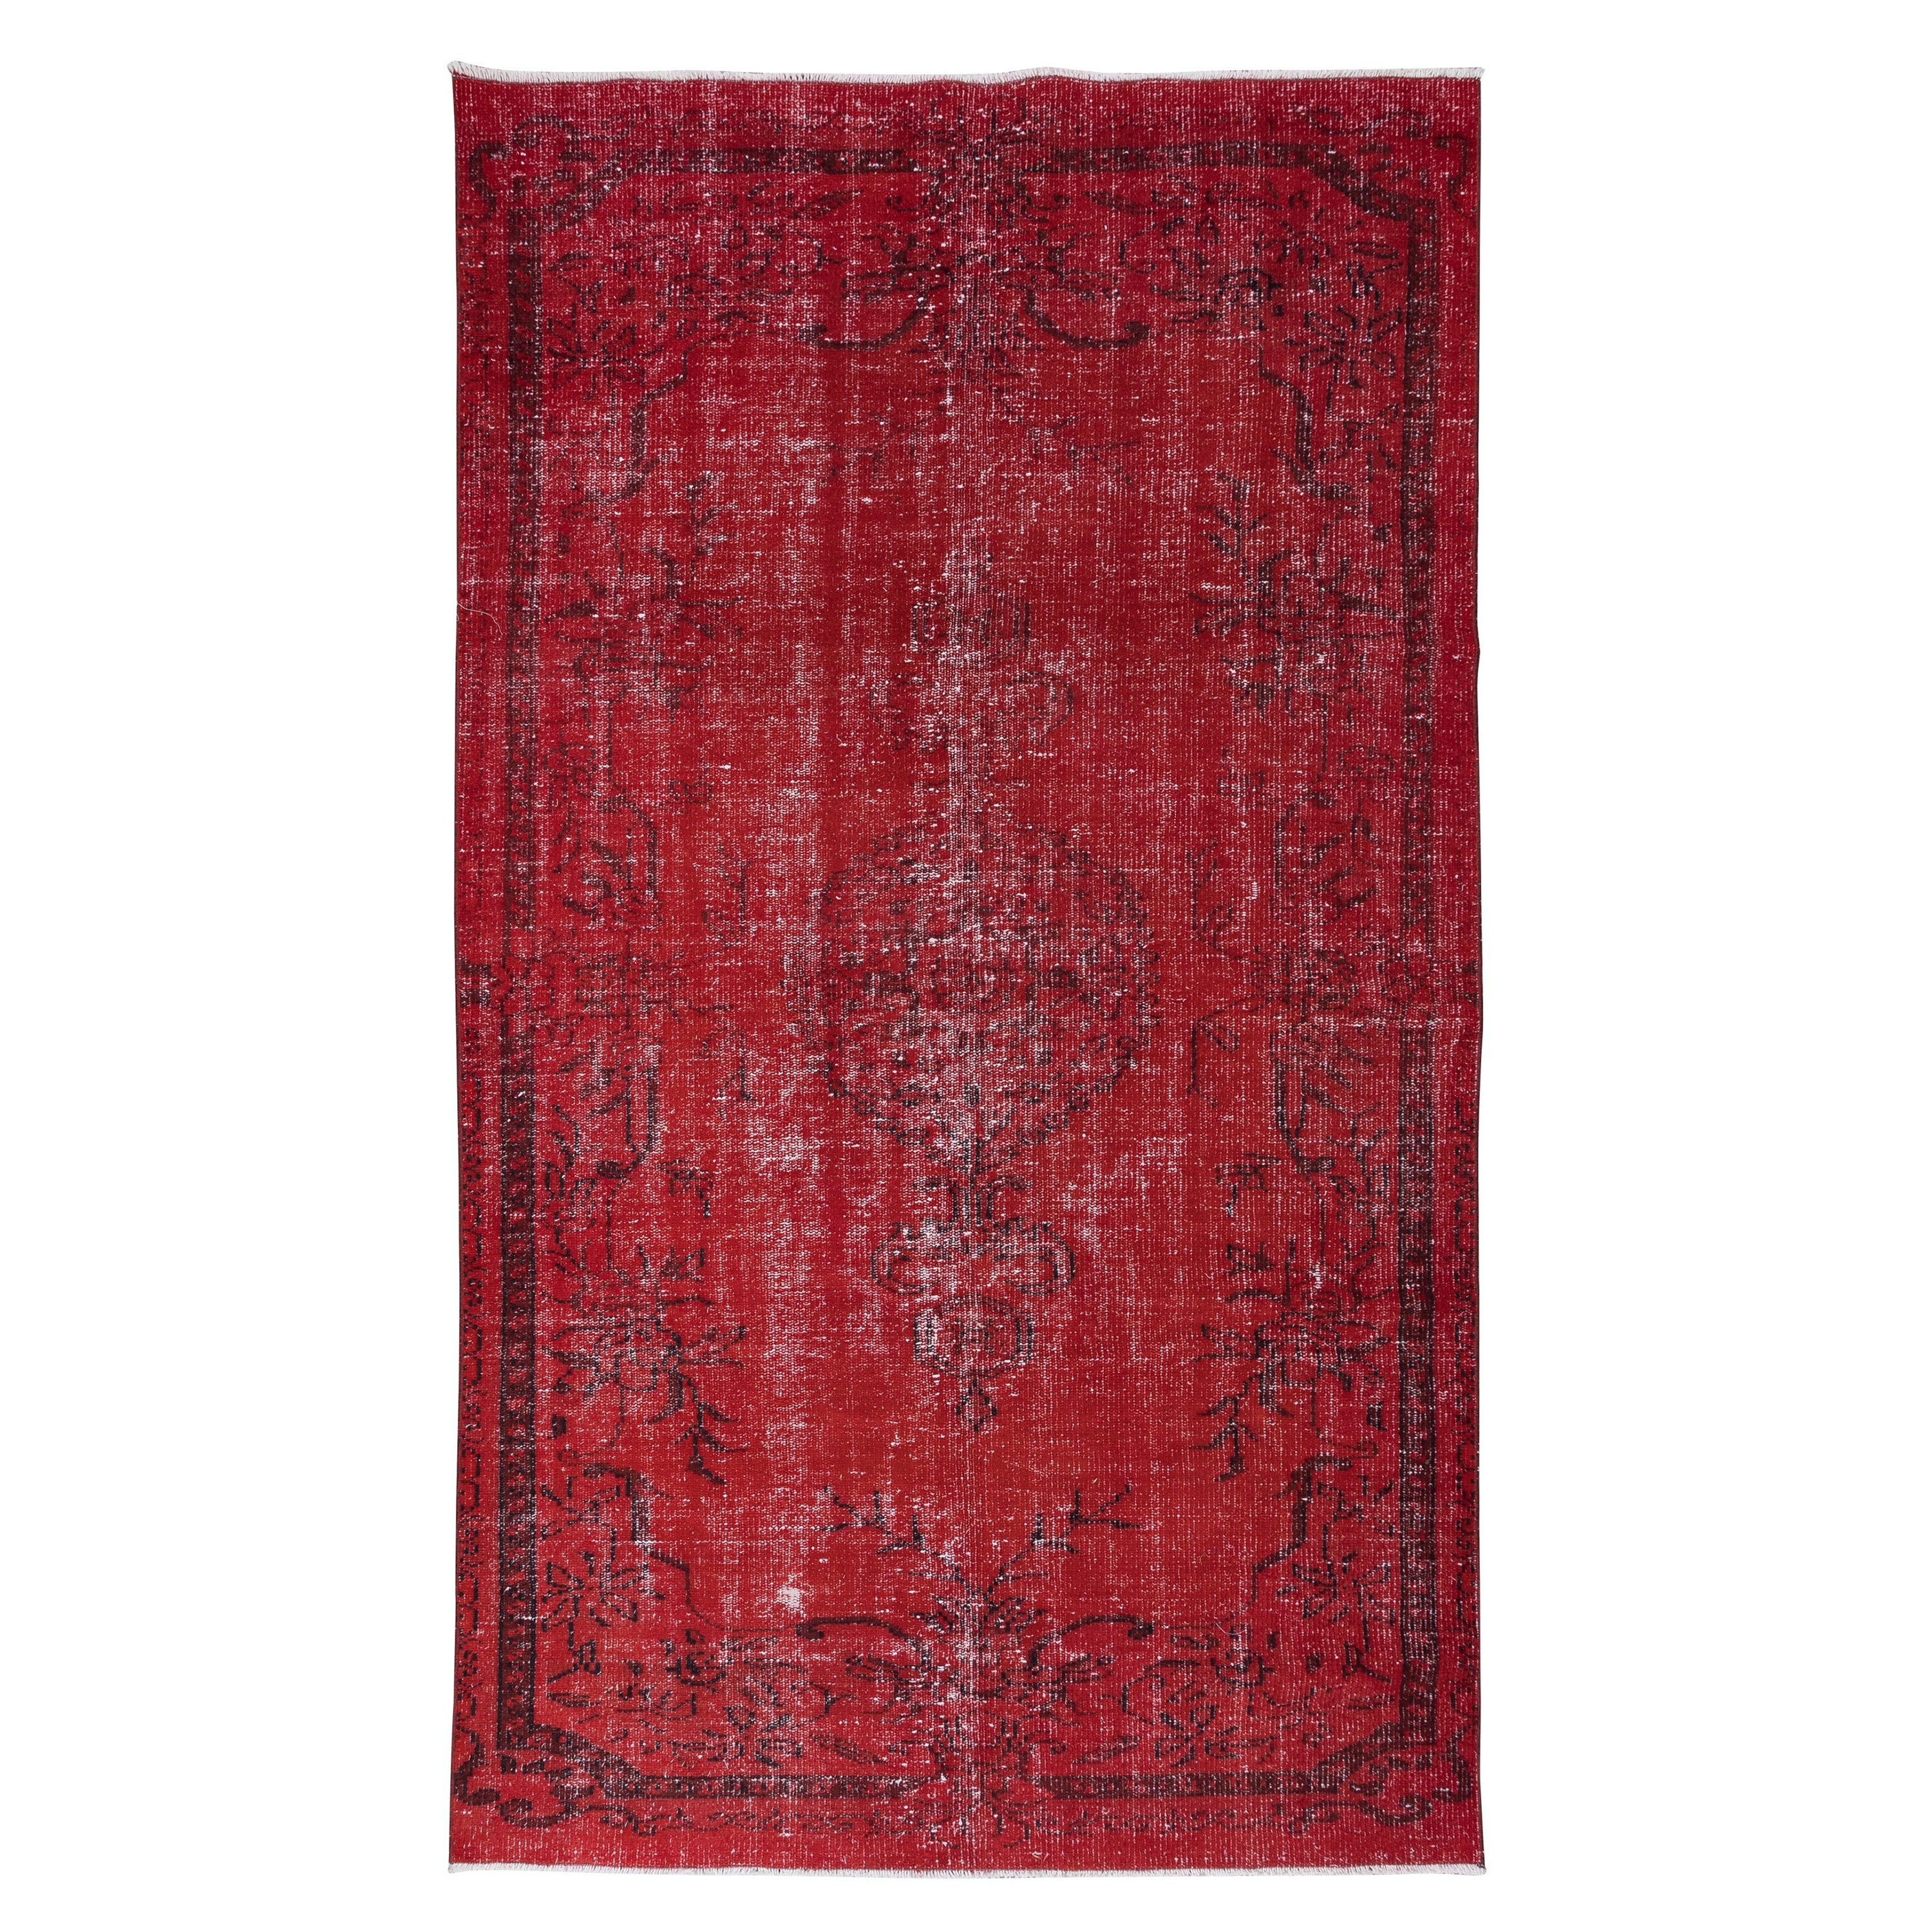 5.5x9.2 Ft Modernity Area Rug in Red, Handwoven and Handknotted in Turkey (tapis tissé et noué à la main en Turquie)